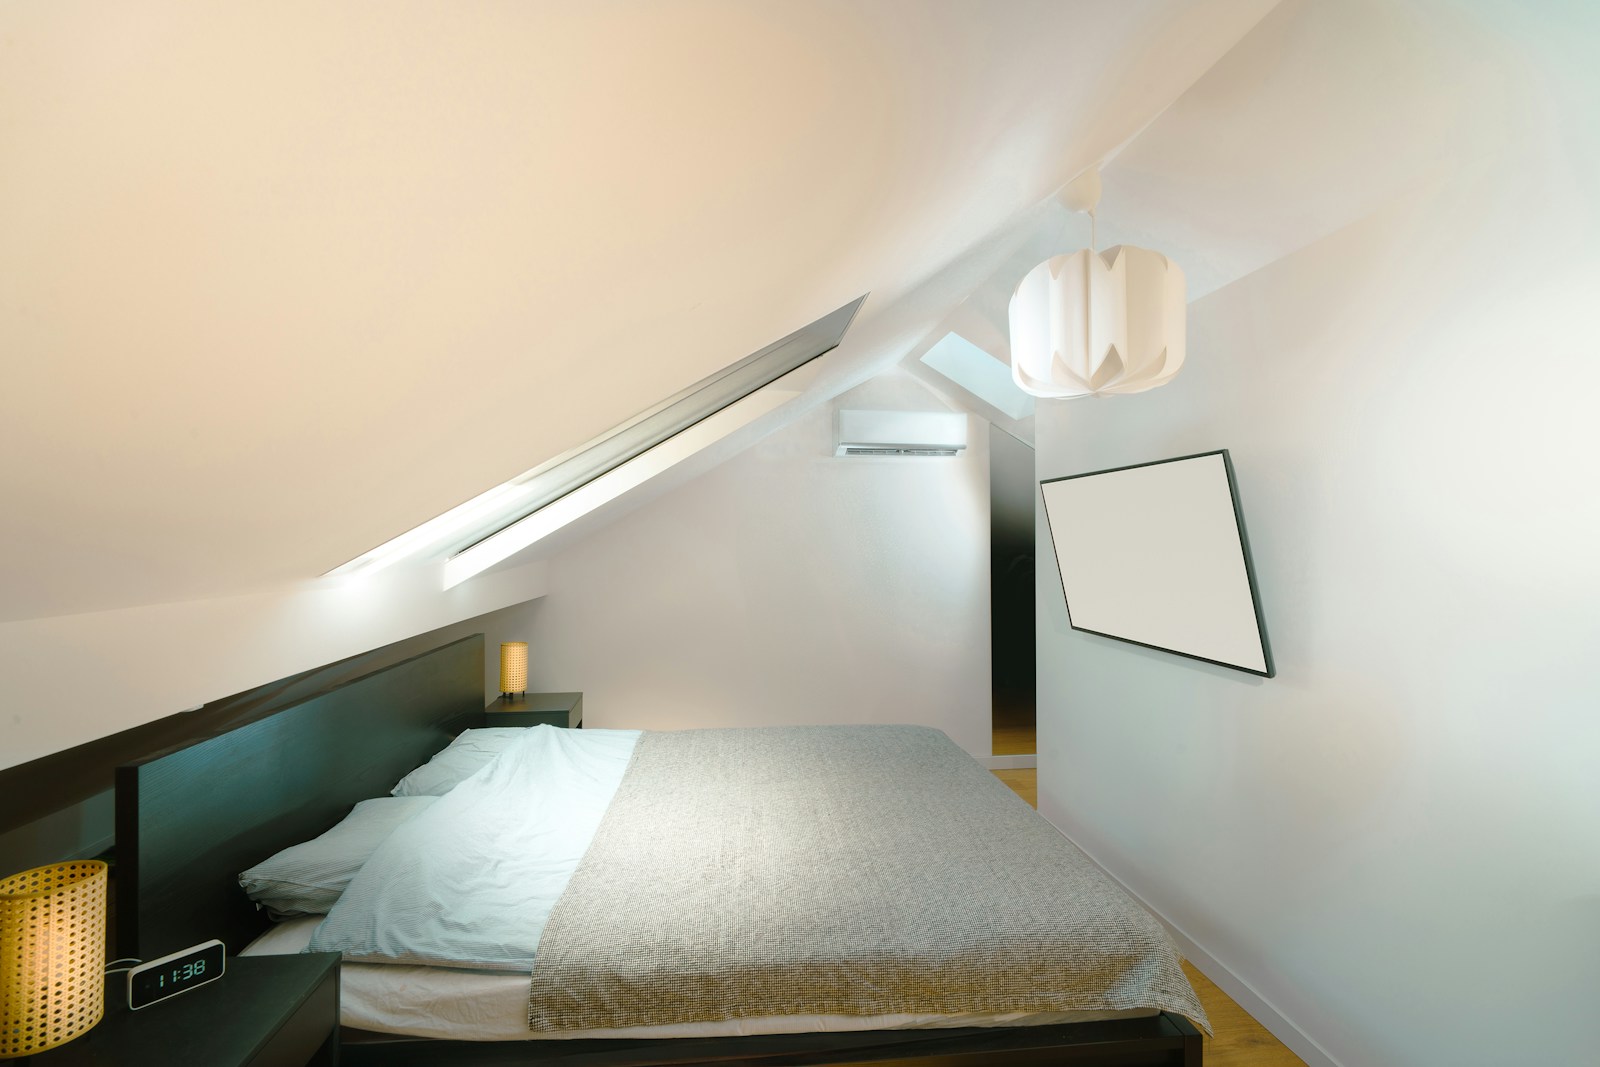 A bed in a room with a slanted ceiling